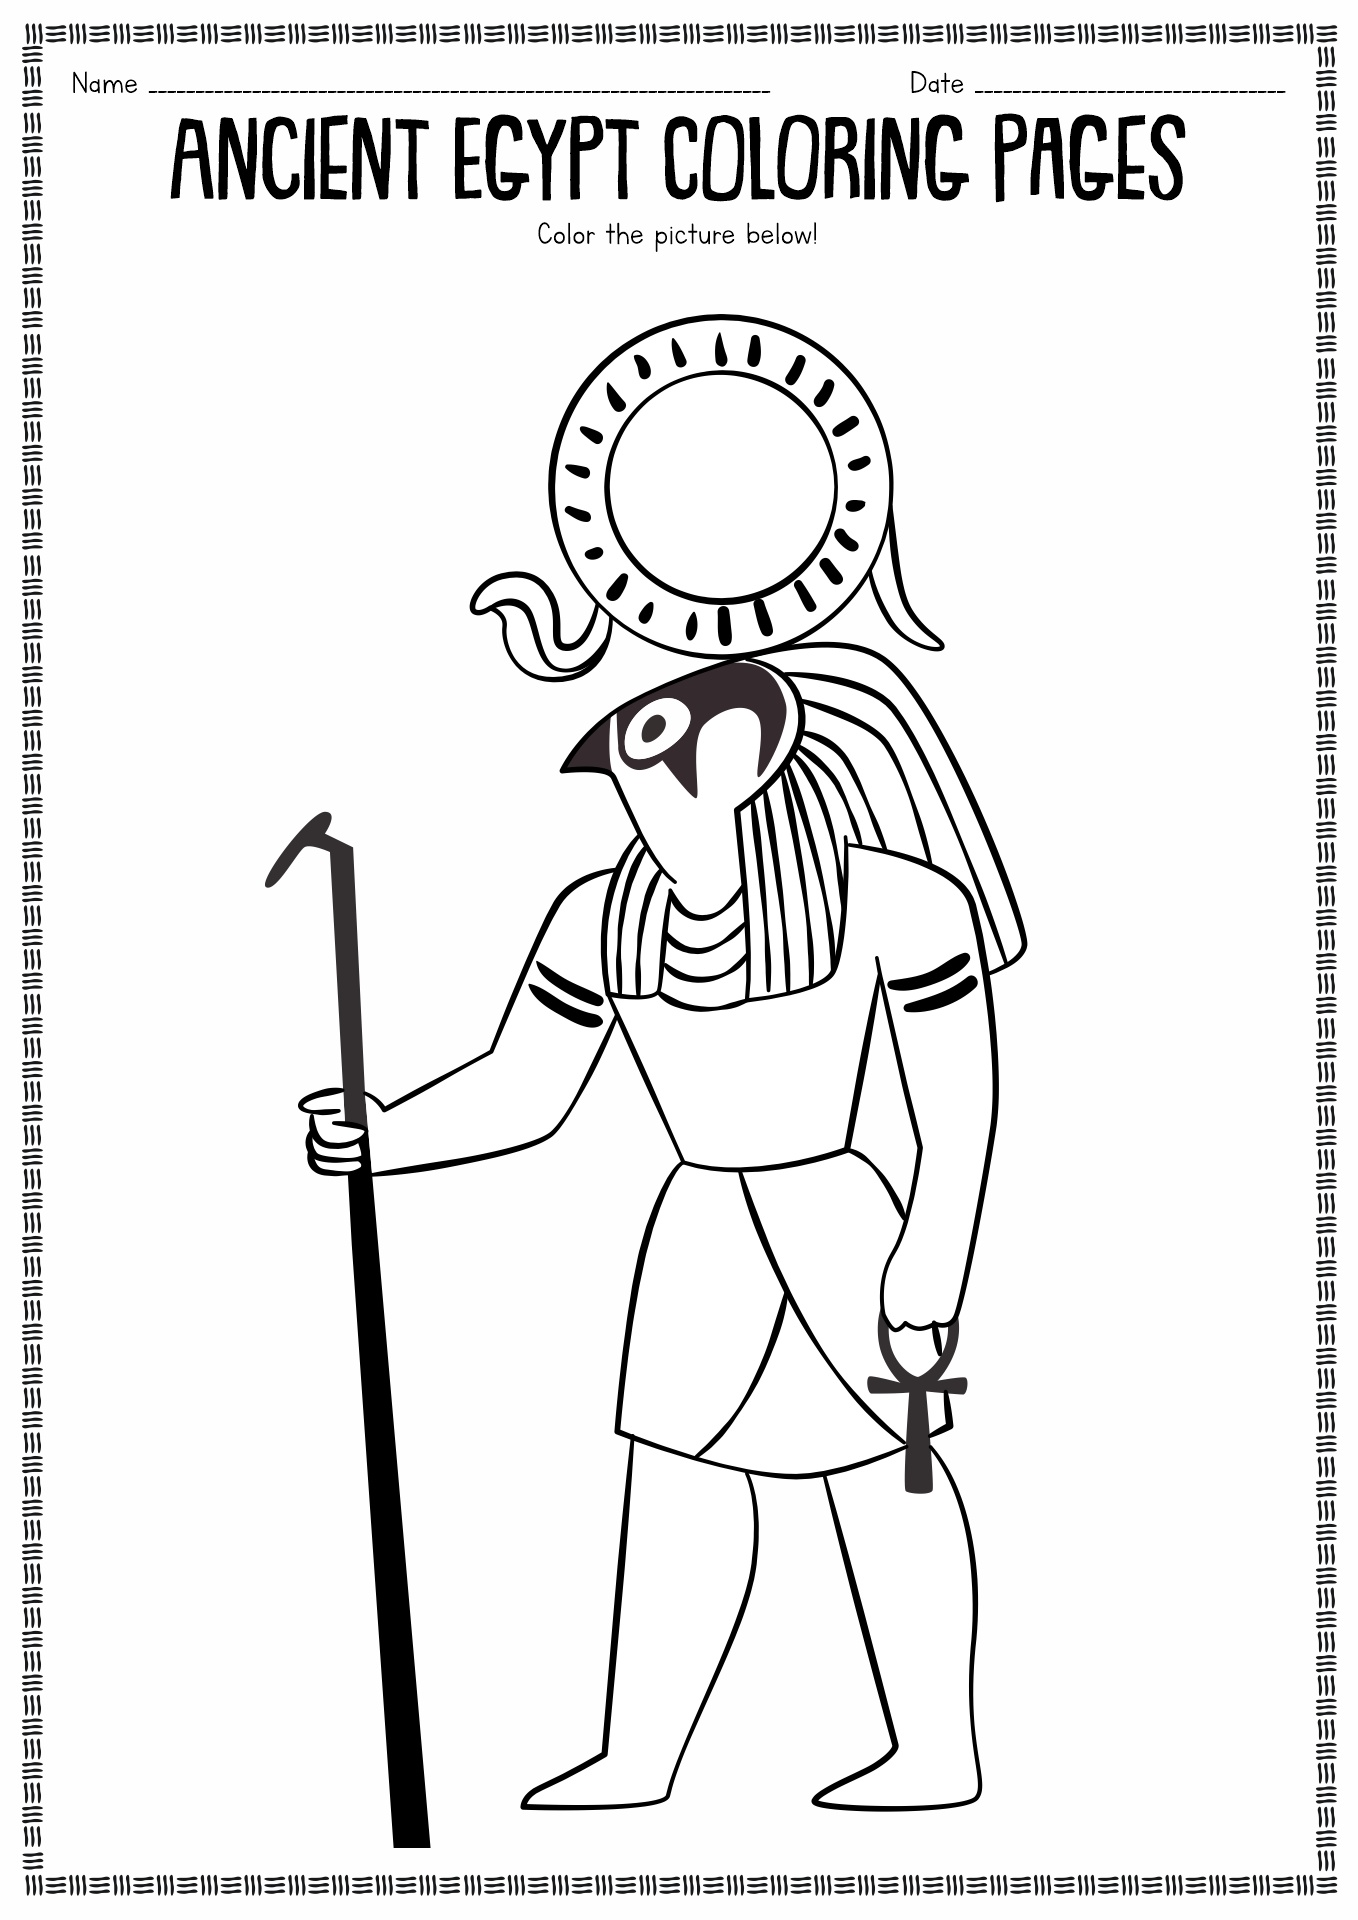 Ancient Egyptian Coloring Pages Image